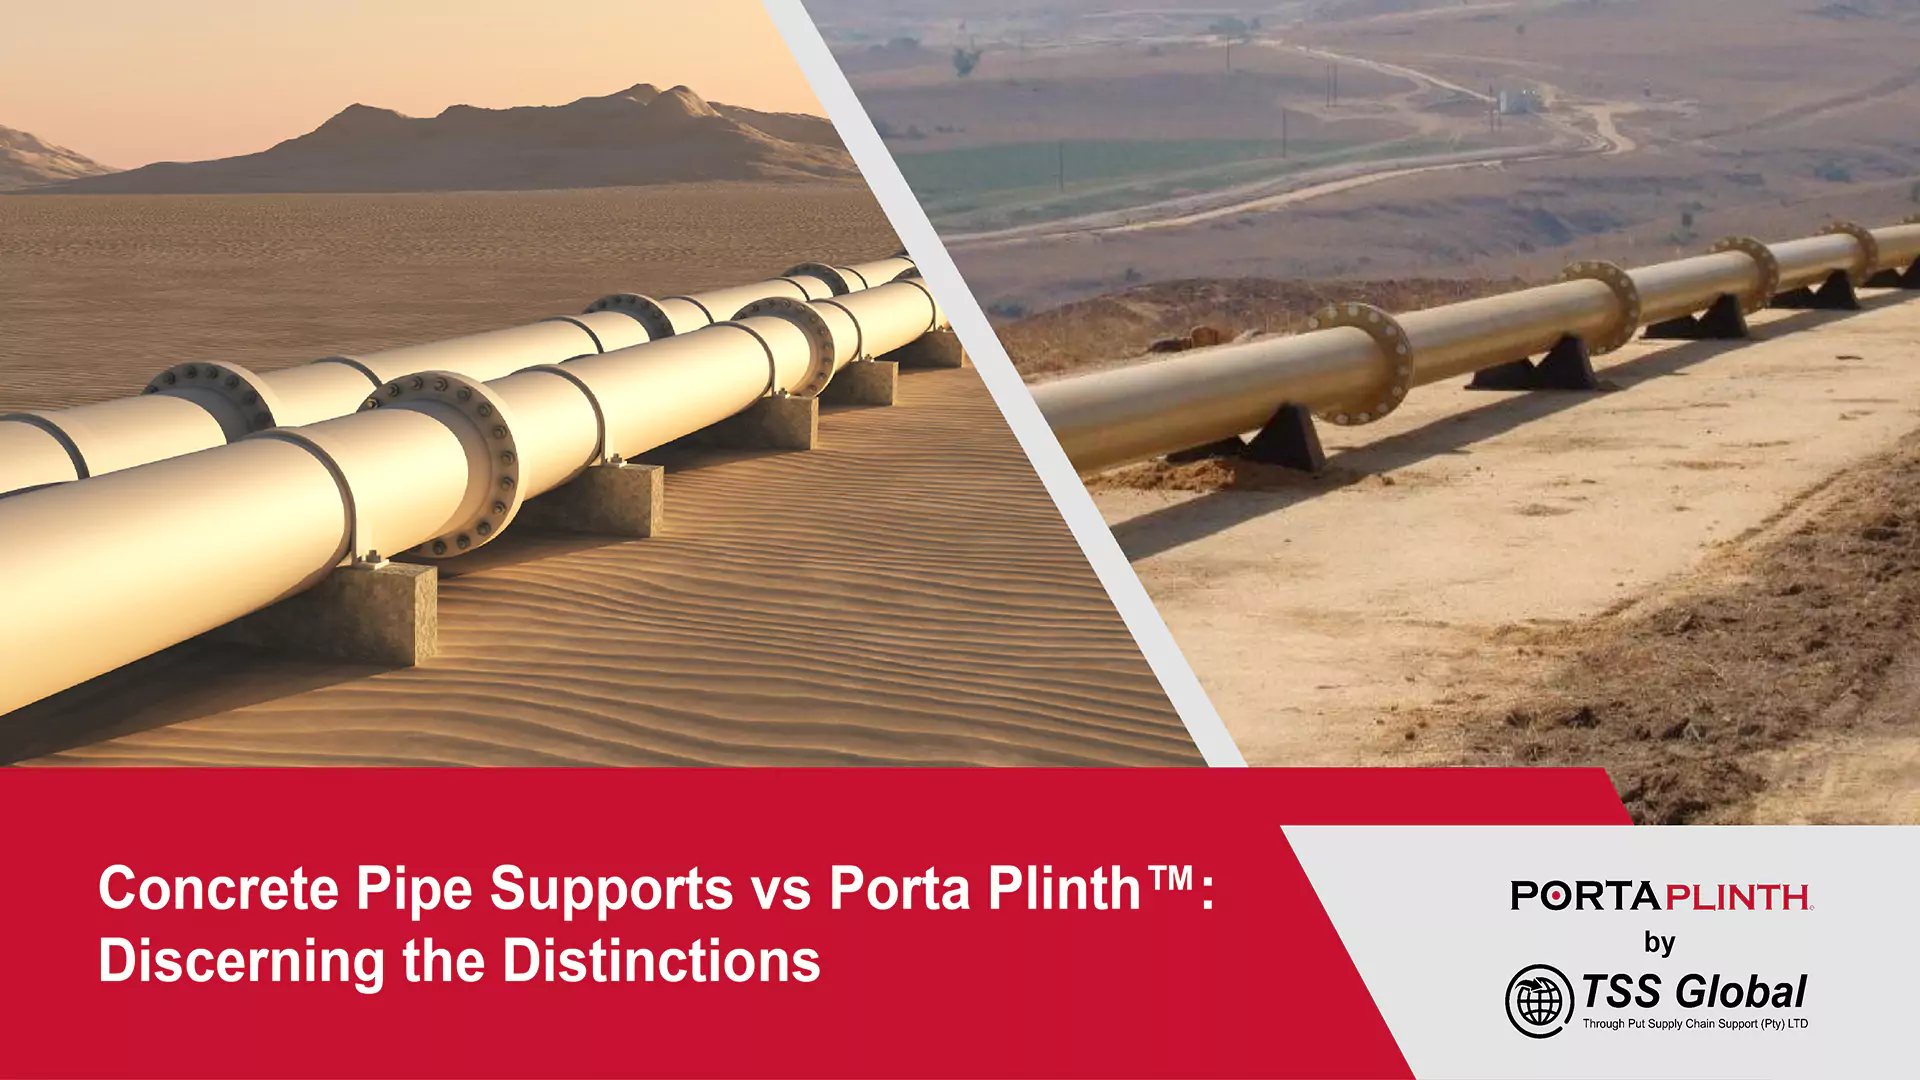 Comparing Concrete Pipe Supports to Porta Plinth™: Discerning the Distinctions